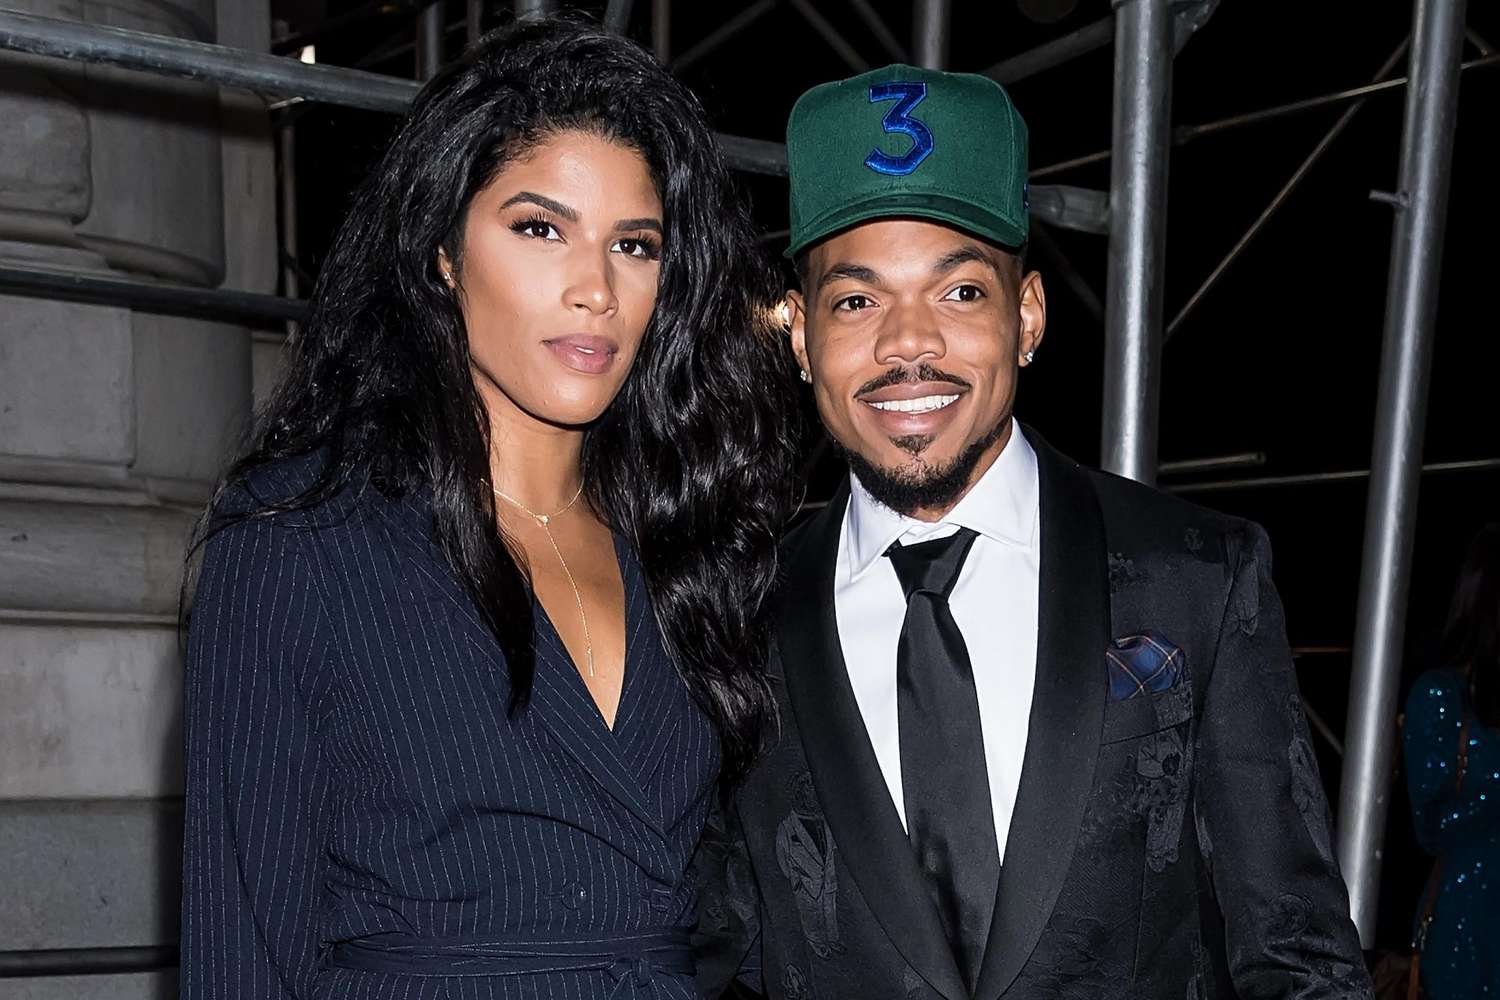 Chance The Rapper and Wife Kirsten Corley Have Decided to End Their Marriage